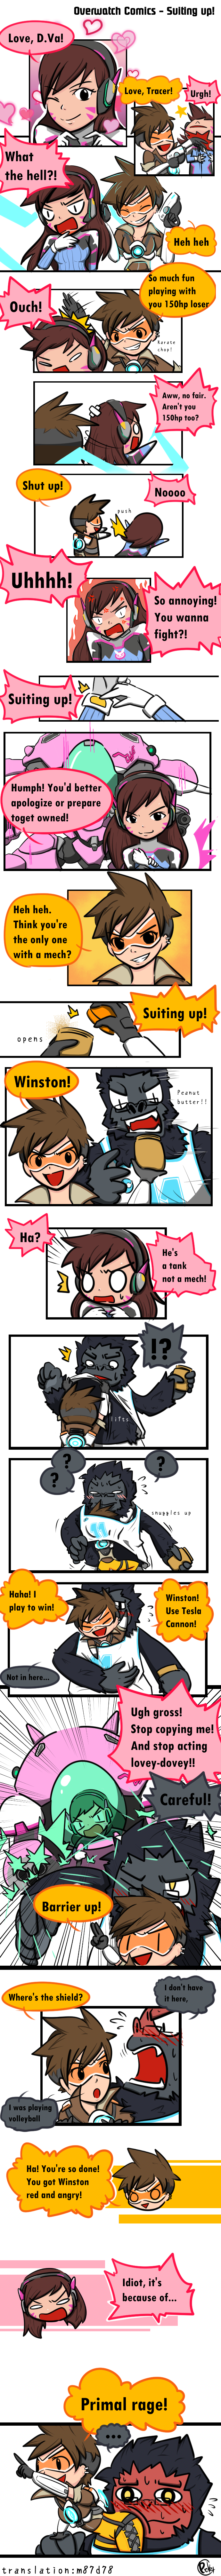 overwatch_comics___suiting_up__by_picketg-db6p638.png